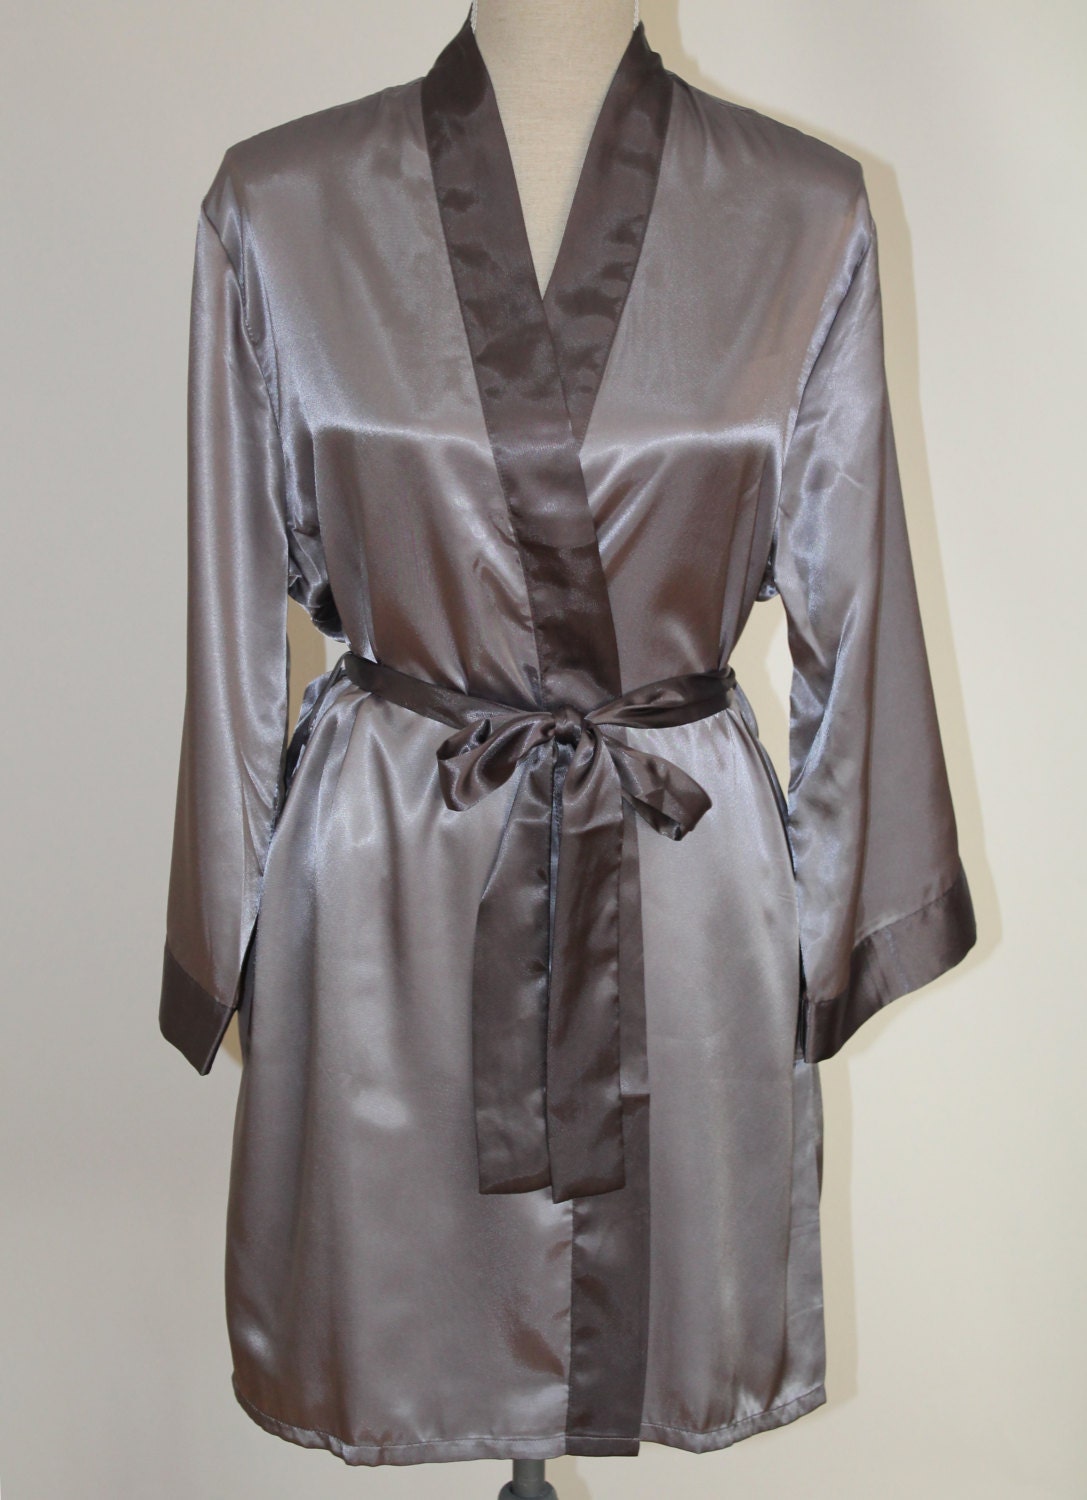 Satin Robe Two colors: Charcoal and grey gray QUALITY the